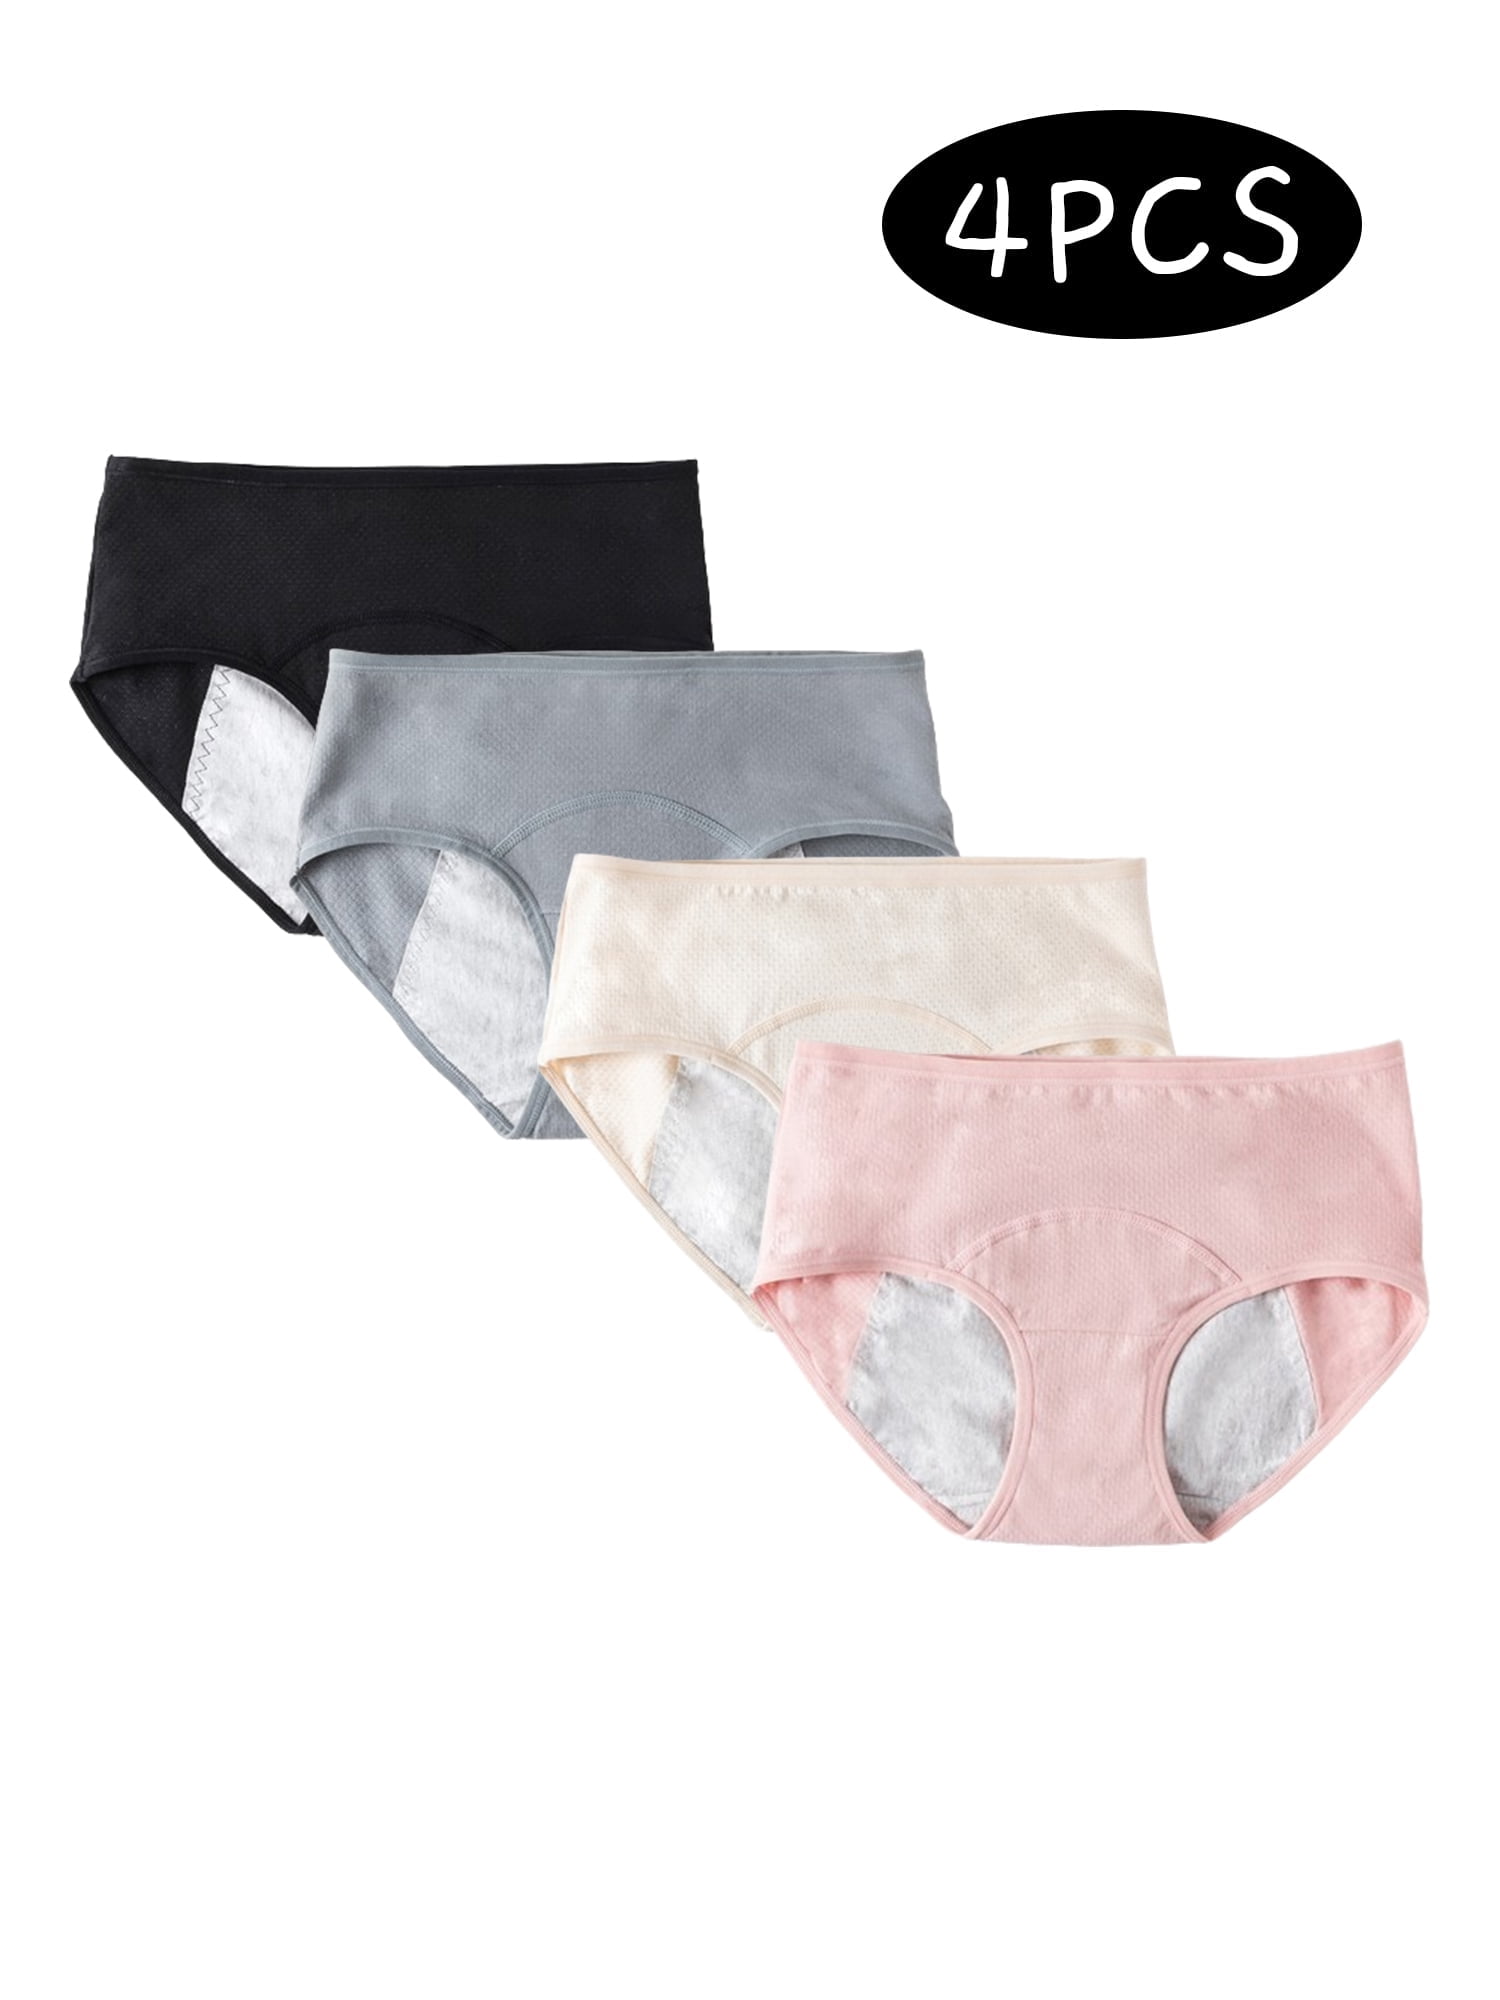  Period Underwear 3 Count Disposable Period Panties for